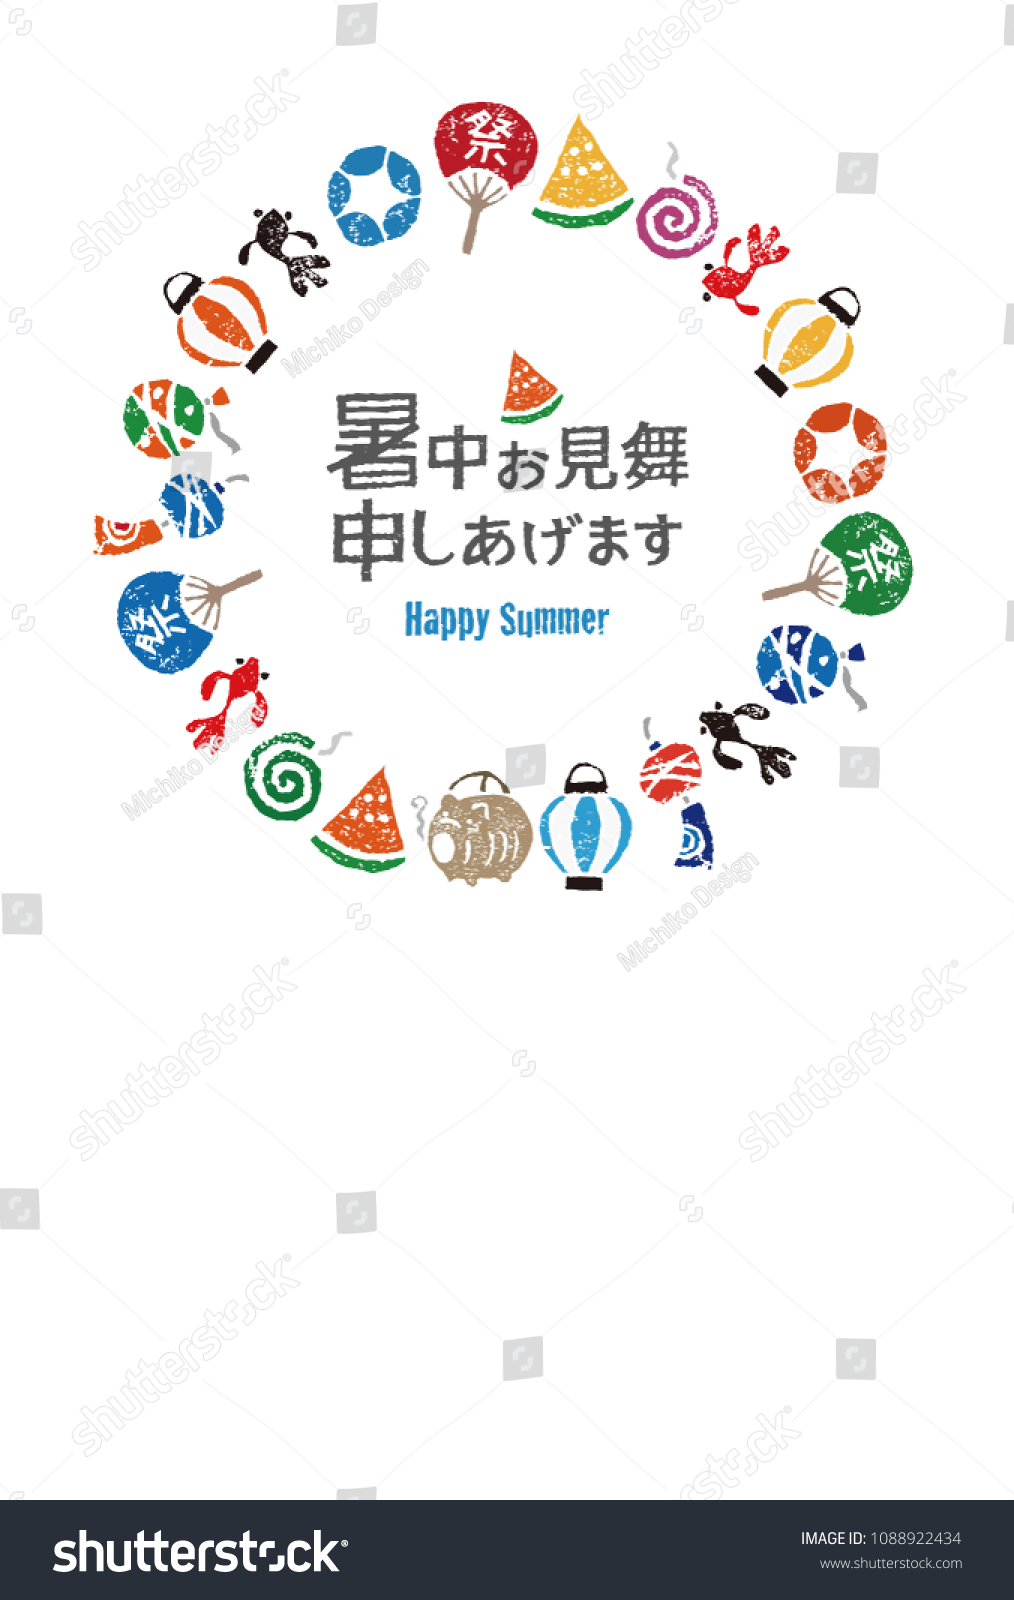 SVG of Summer greeting with Japanese summer elements / translation of Japanese 